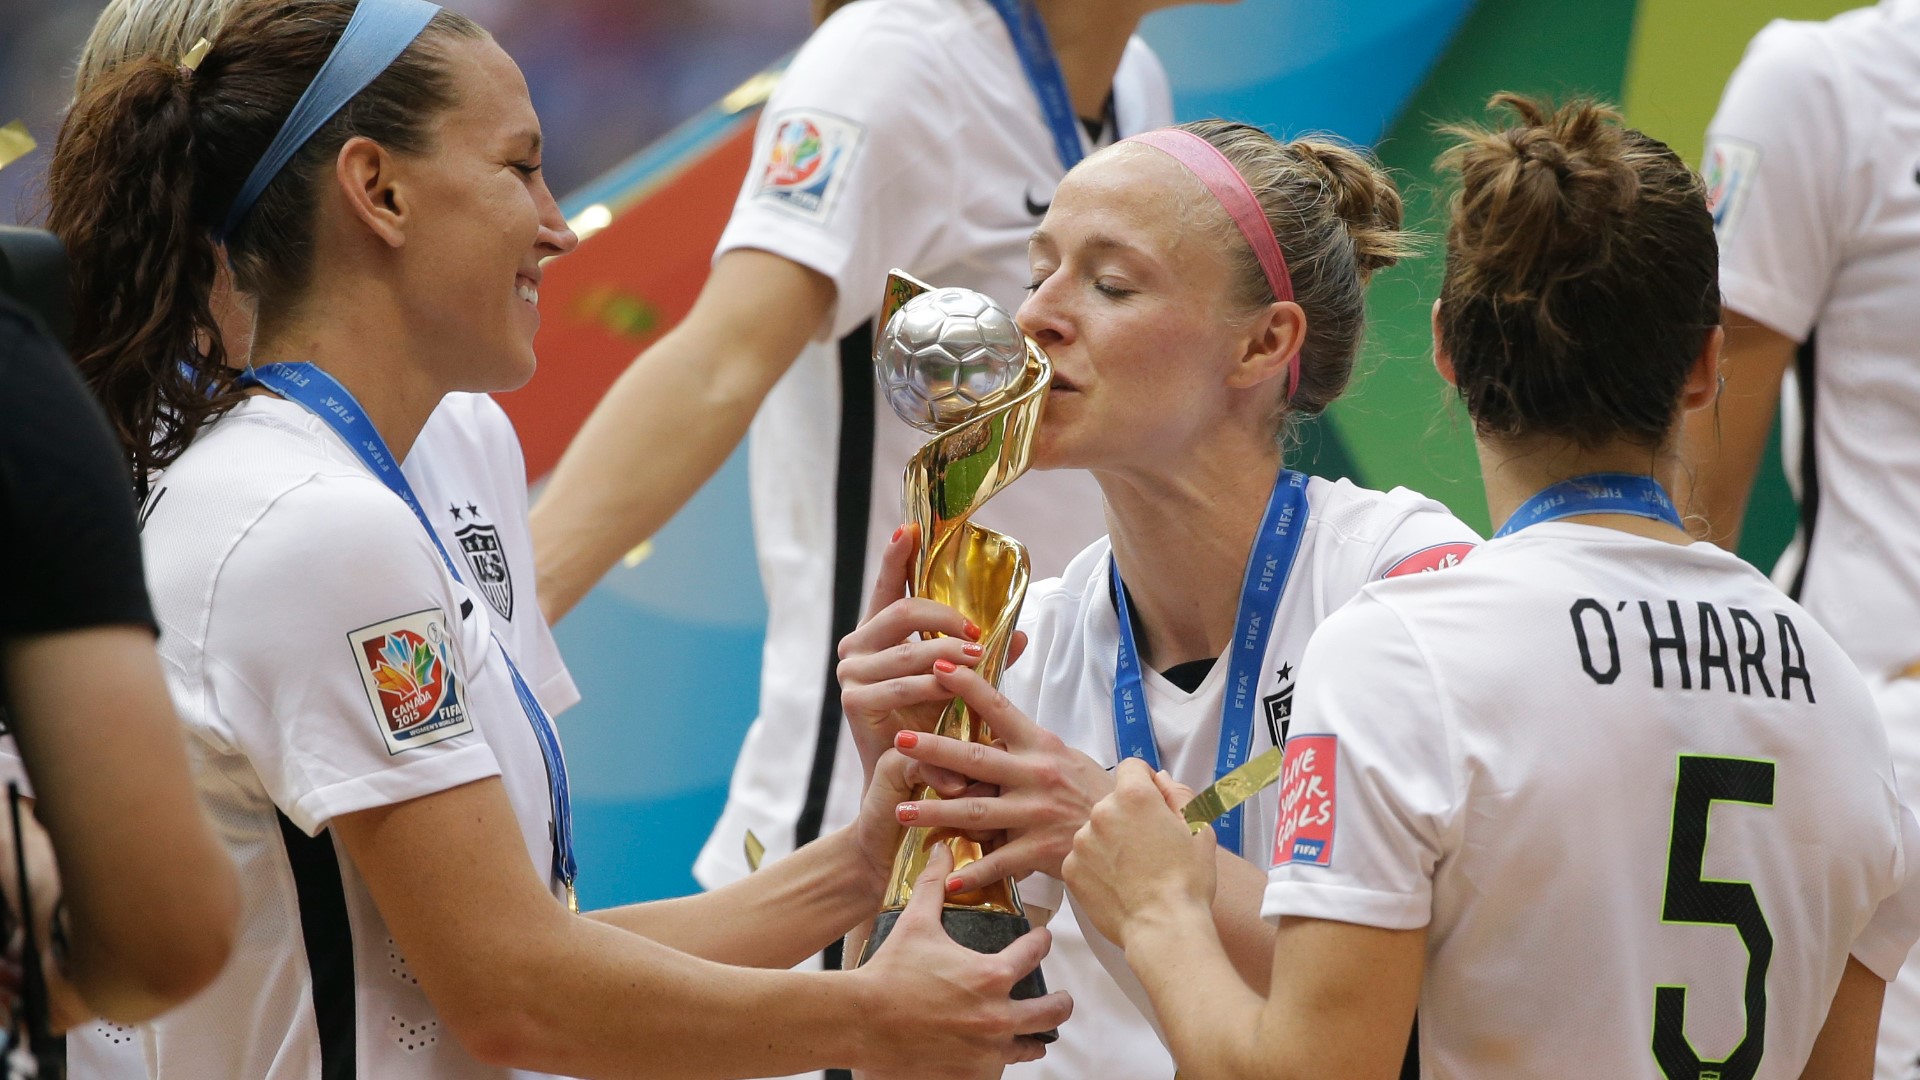 The U.S. Women's National Team has a special legacy when it comes to Olympic soccer thanks to those that came before them